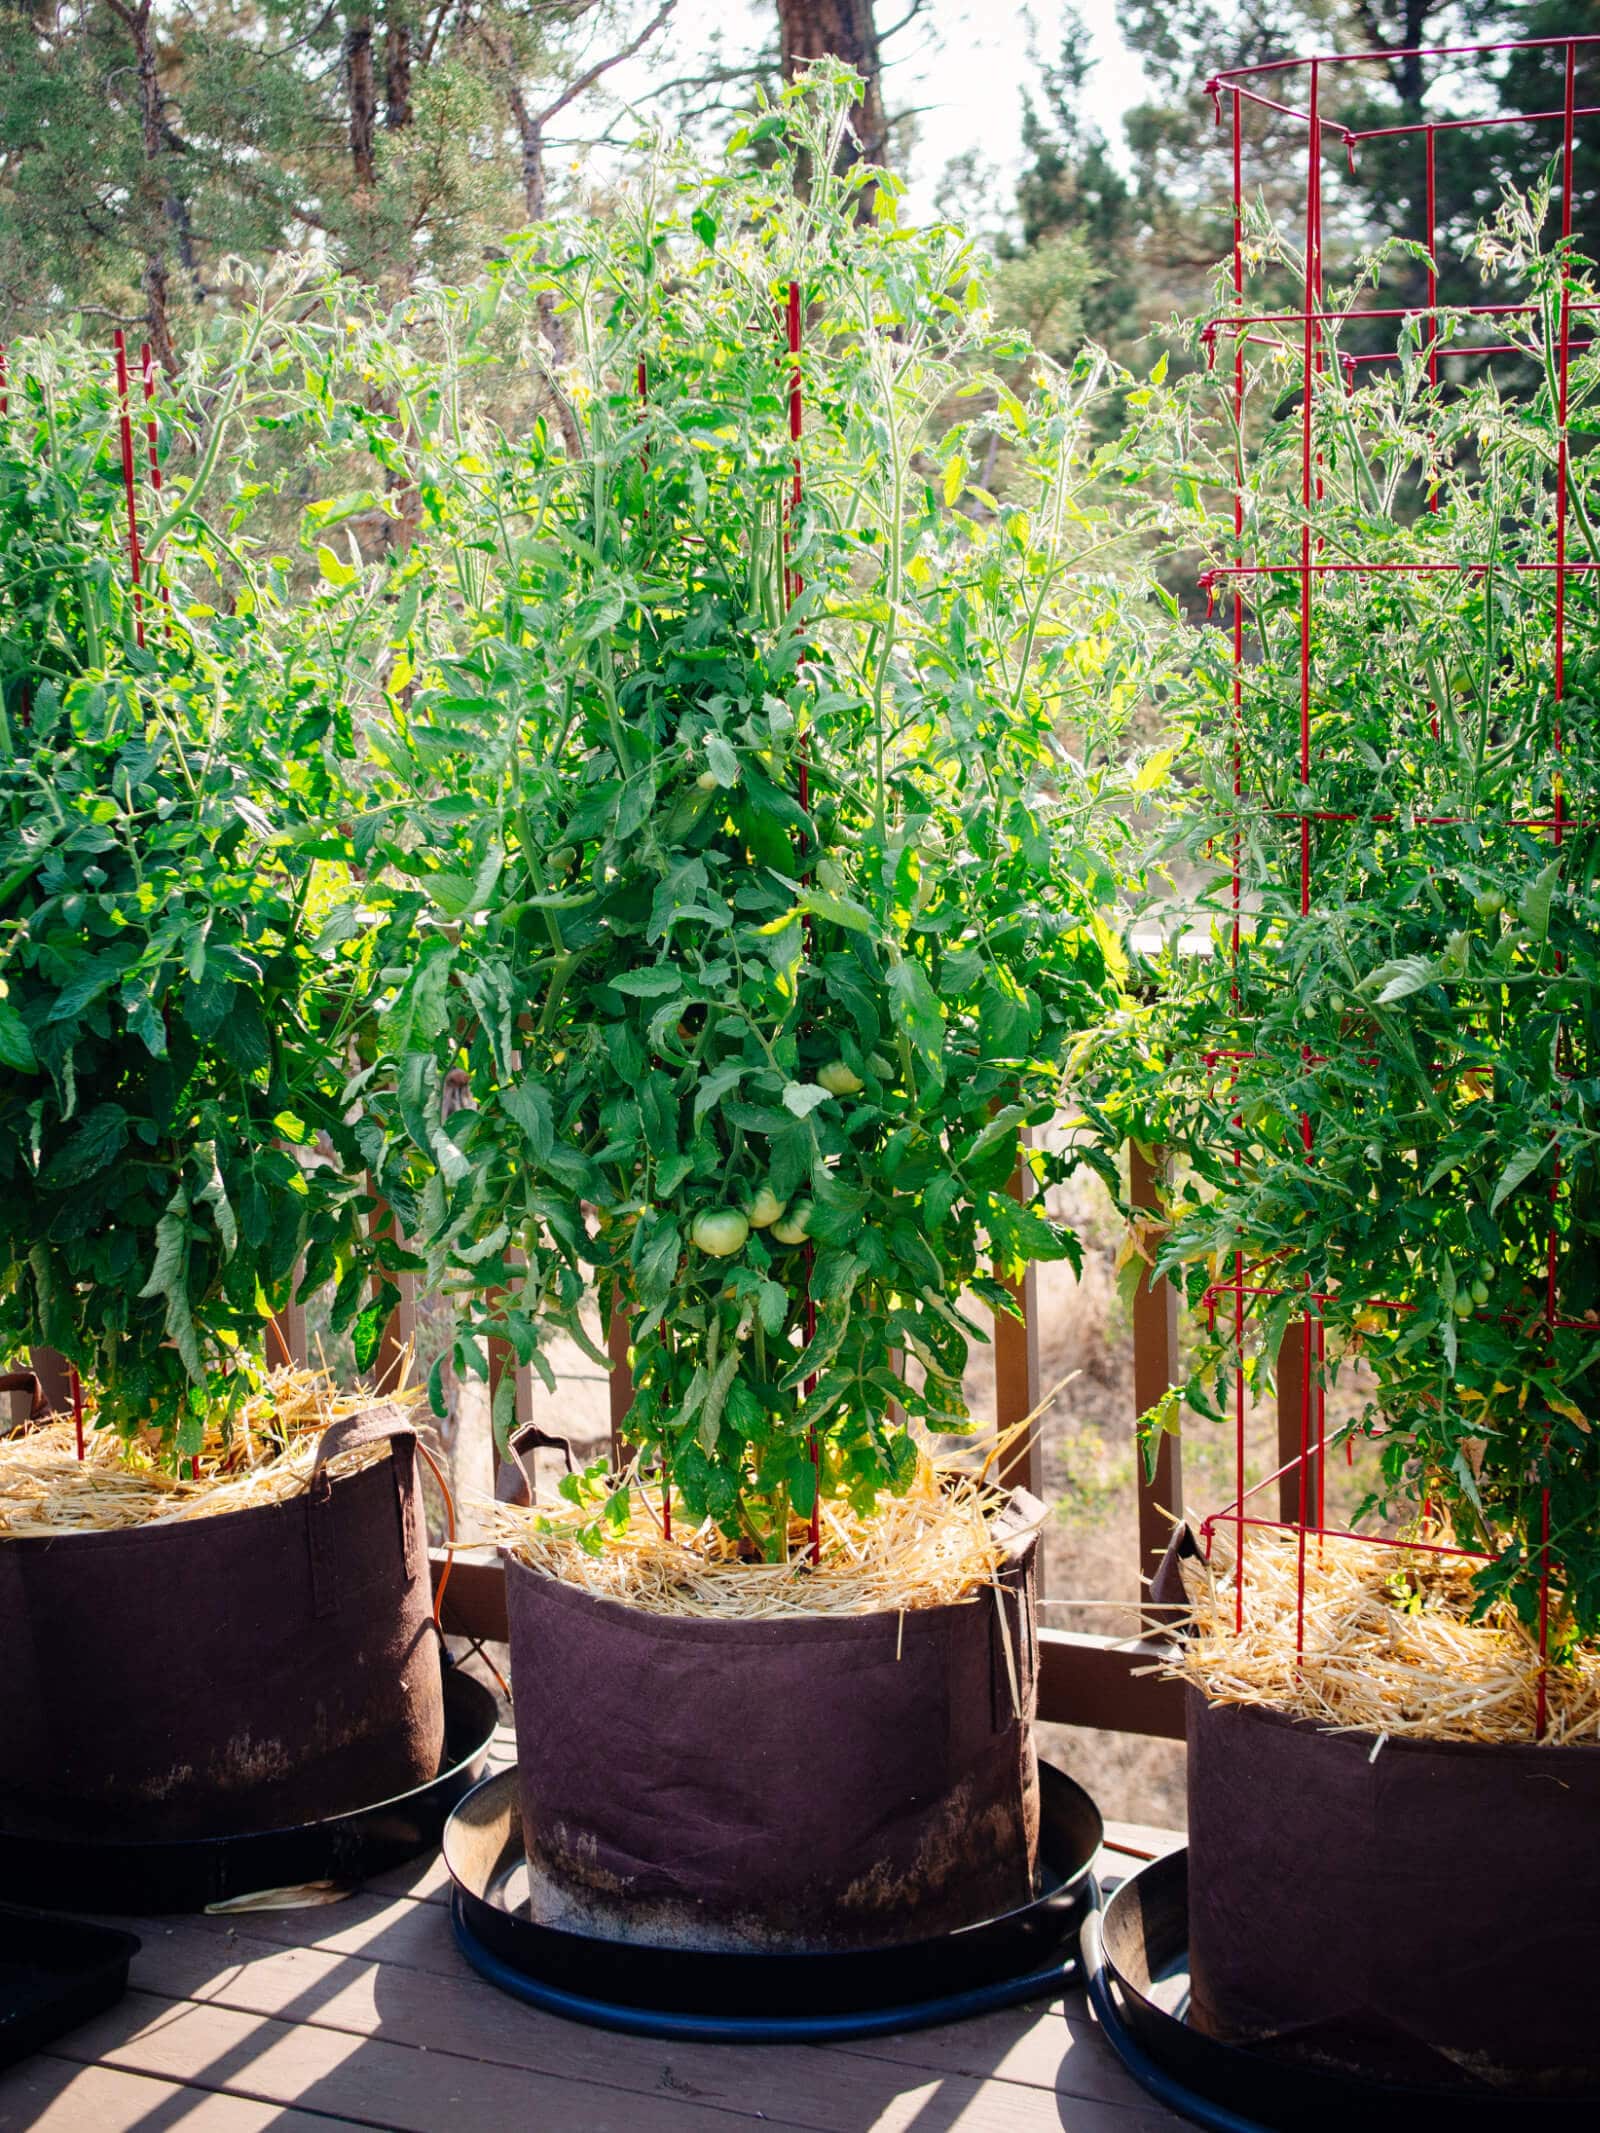 Tomato plants thriving in 20-gallon containers